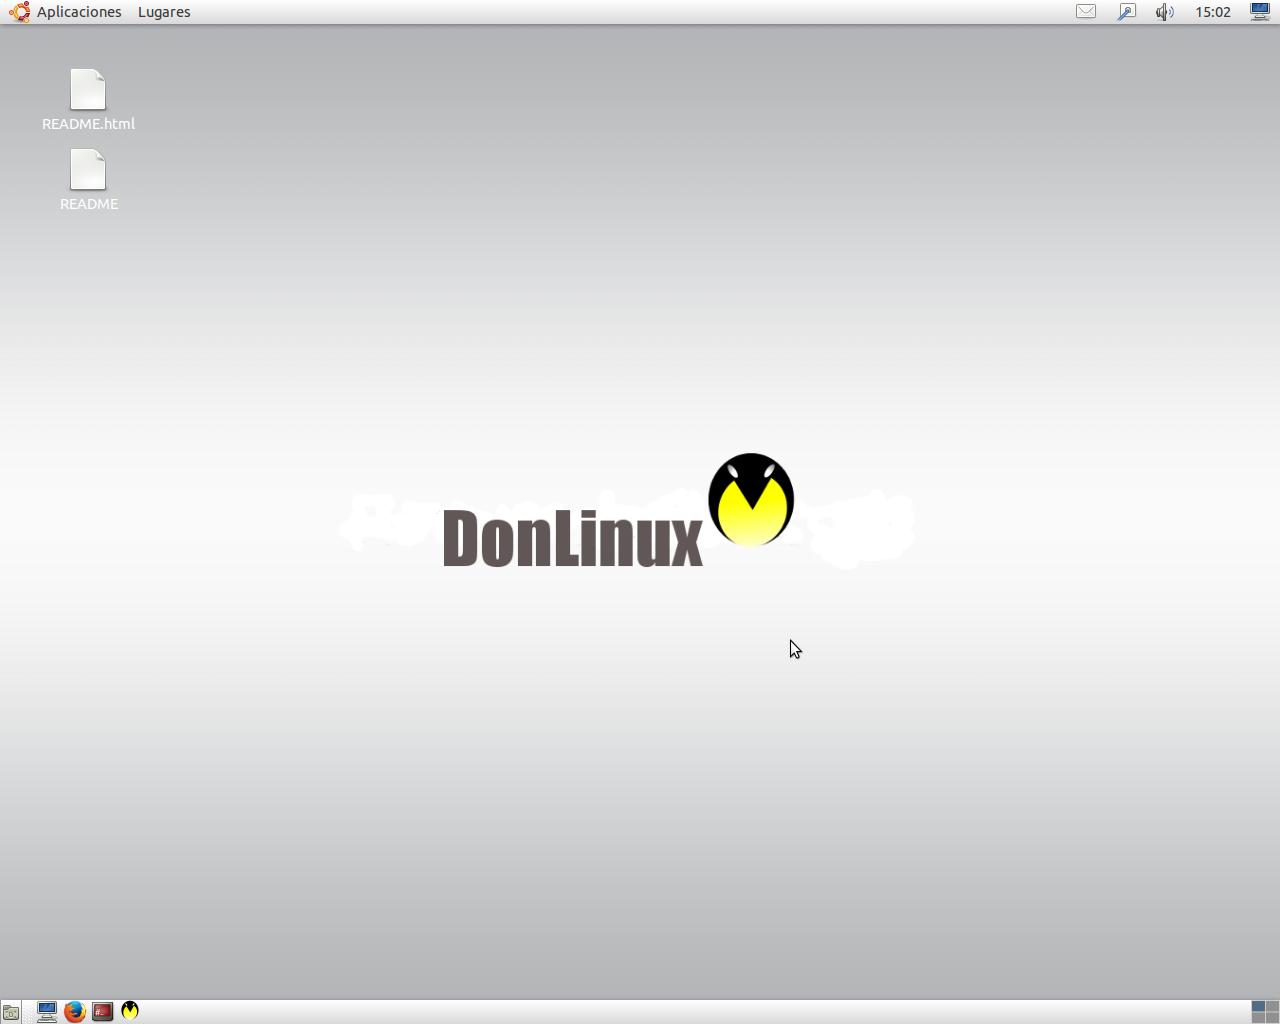 DonLinux